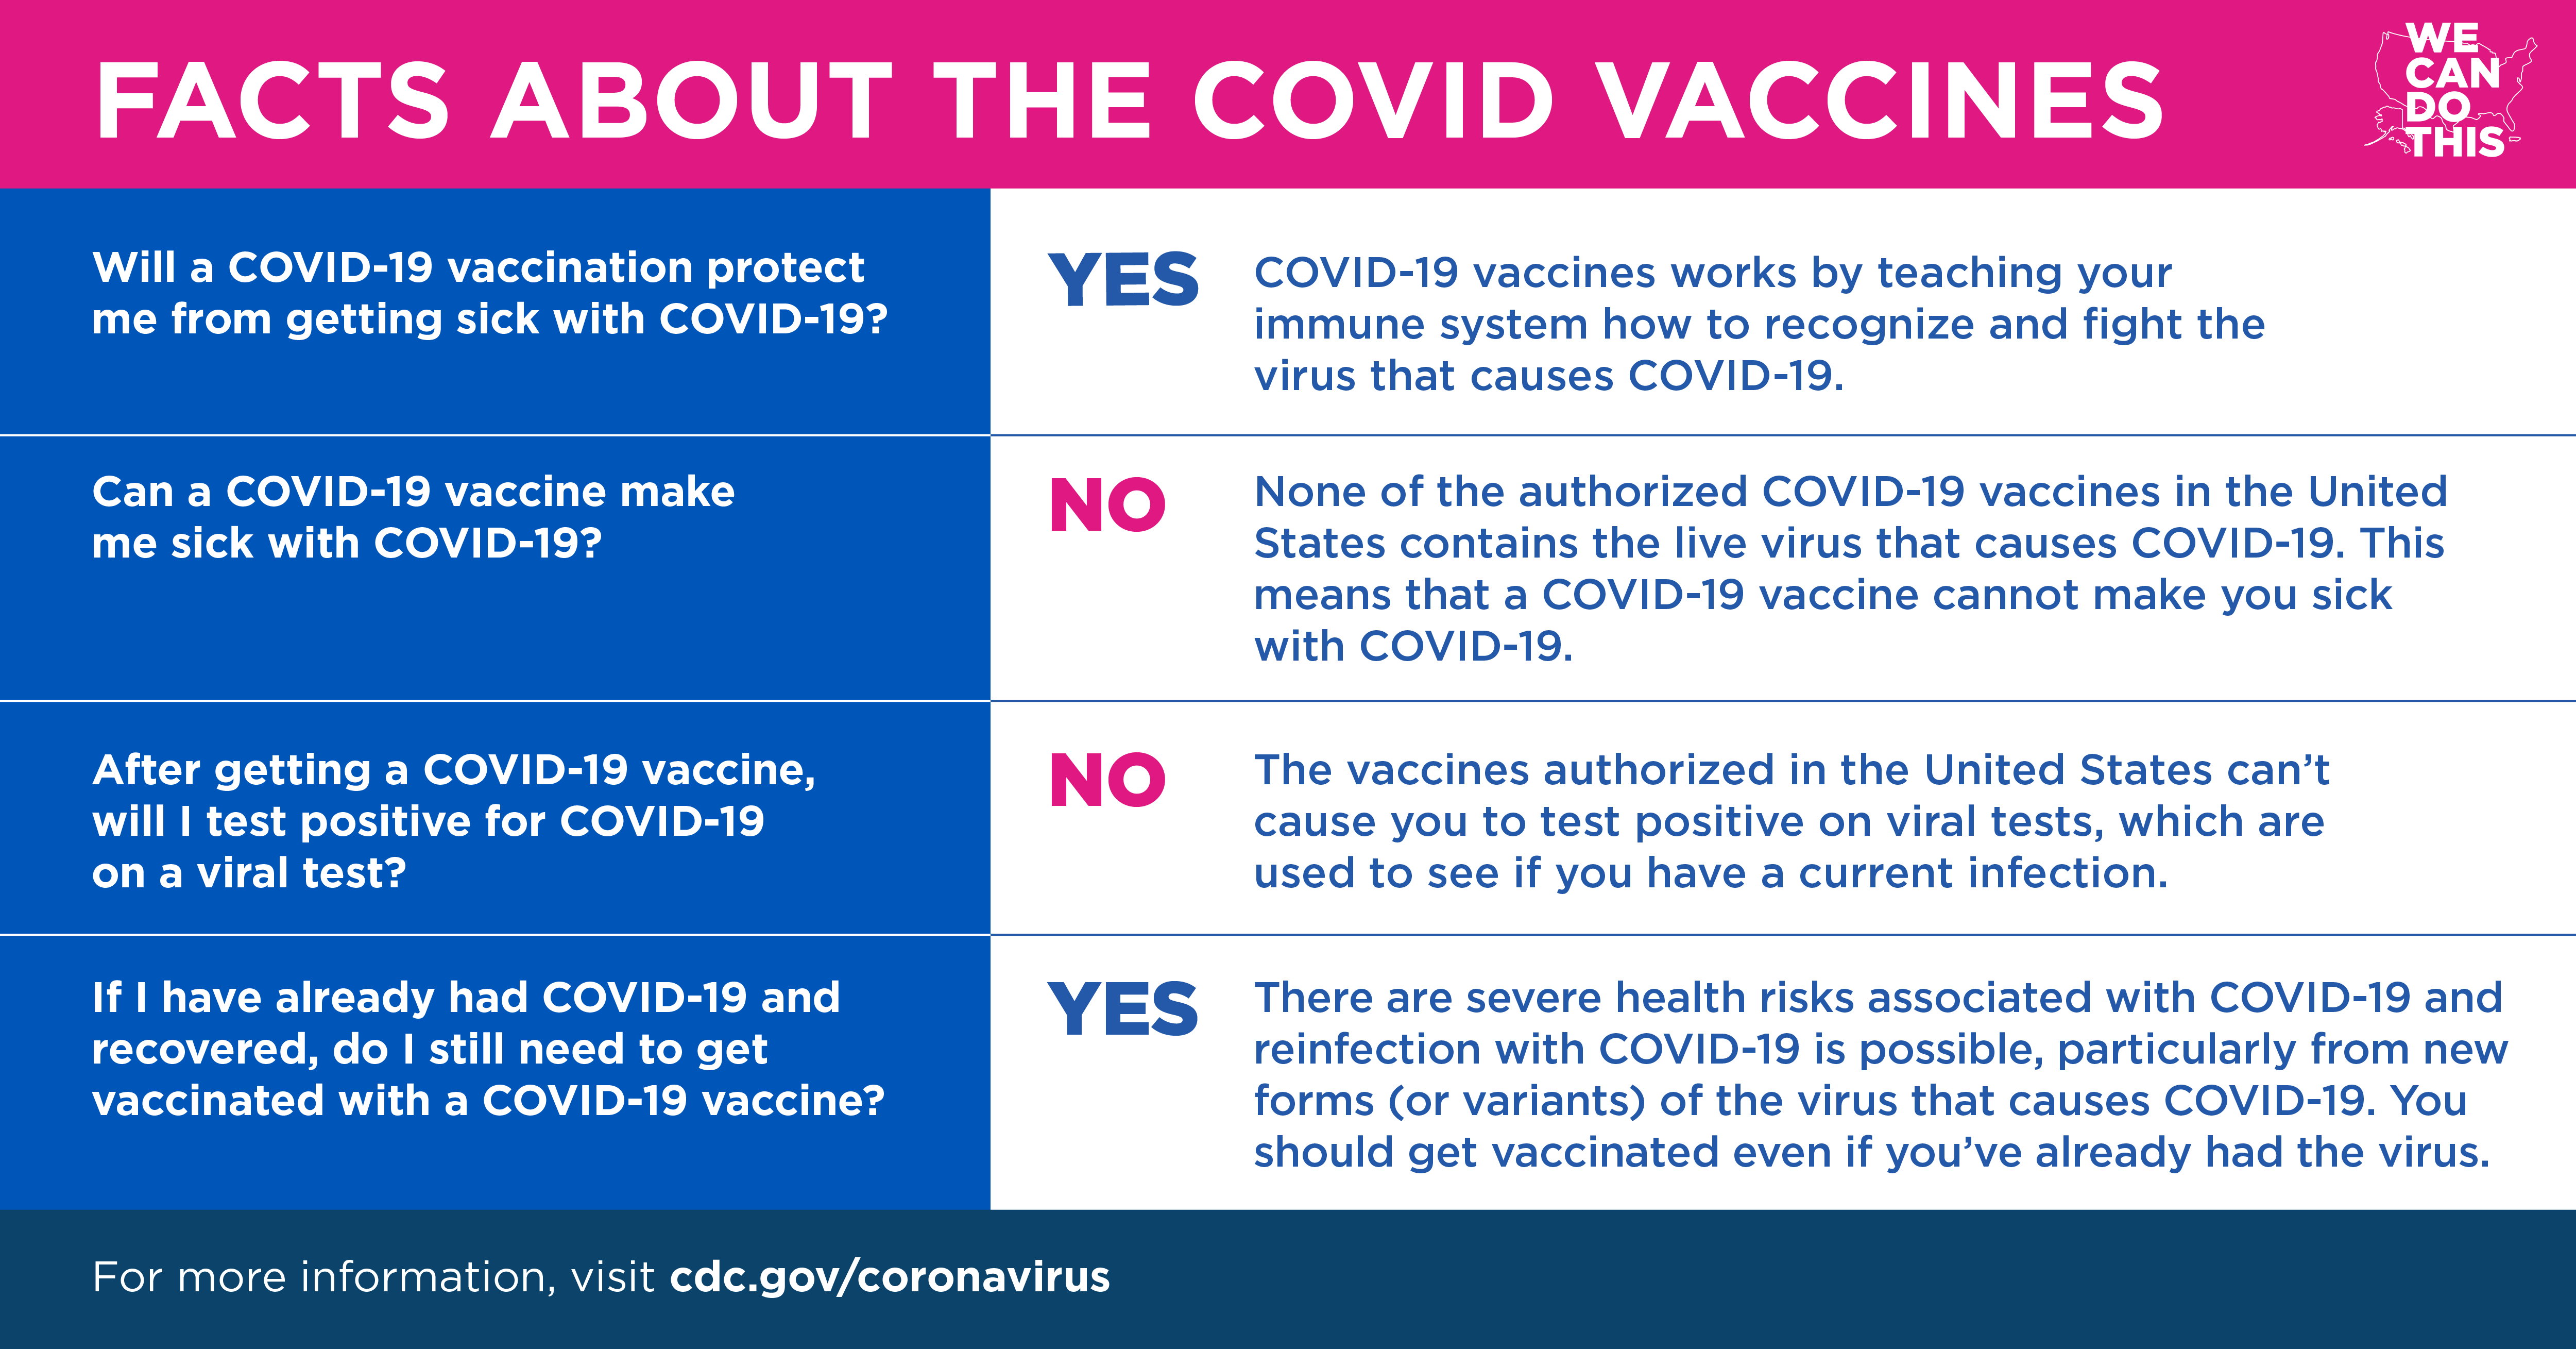 Facts About the COVID Vaccines Graphic for Twitter